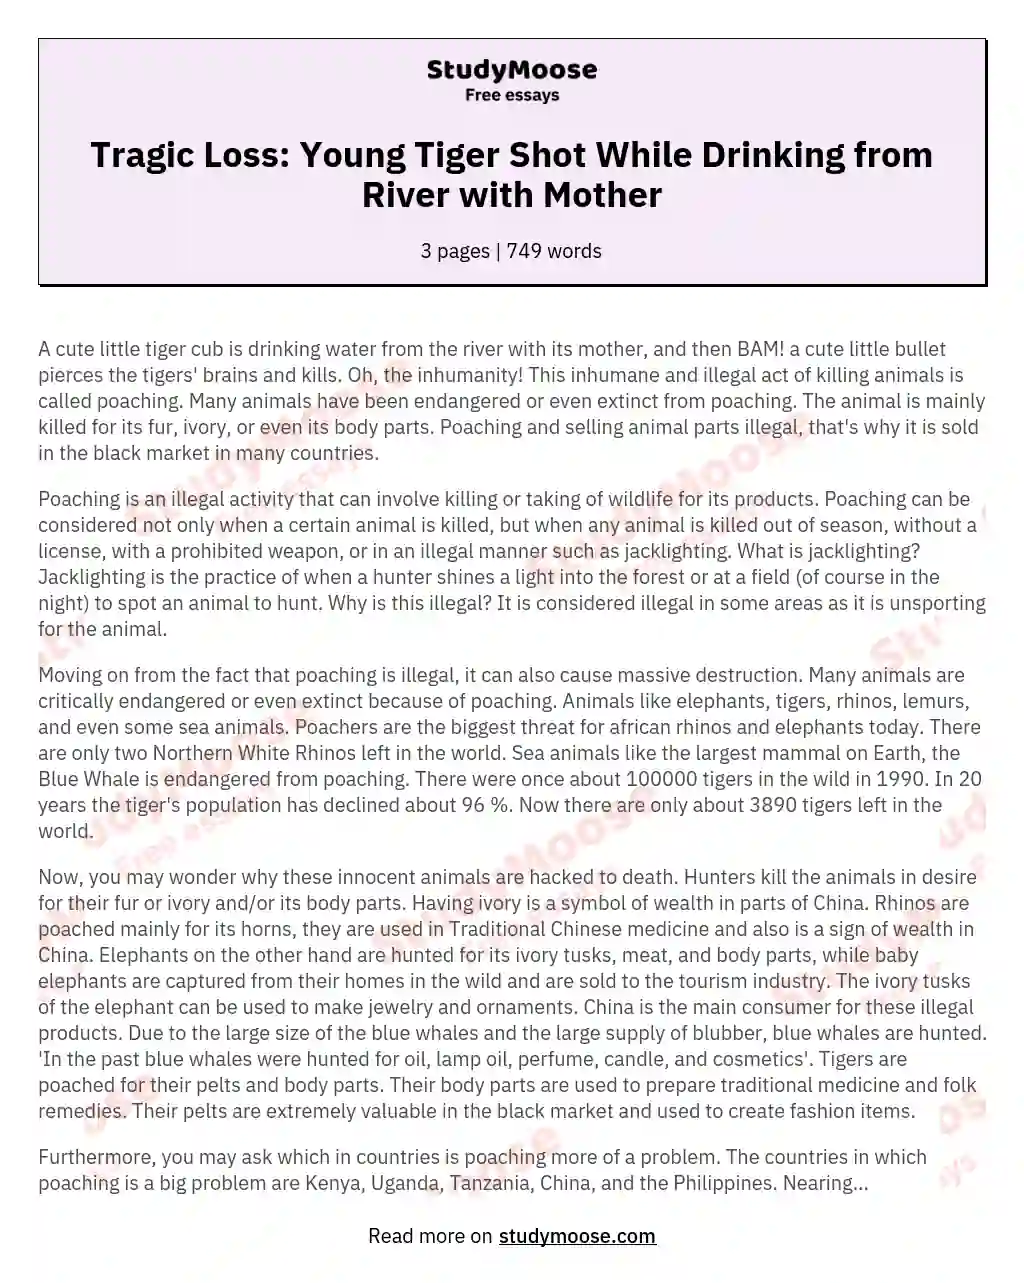 Tragic Loss: Young Tiger Shot While Drinking from River with Mother essay